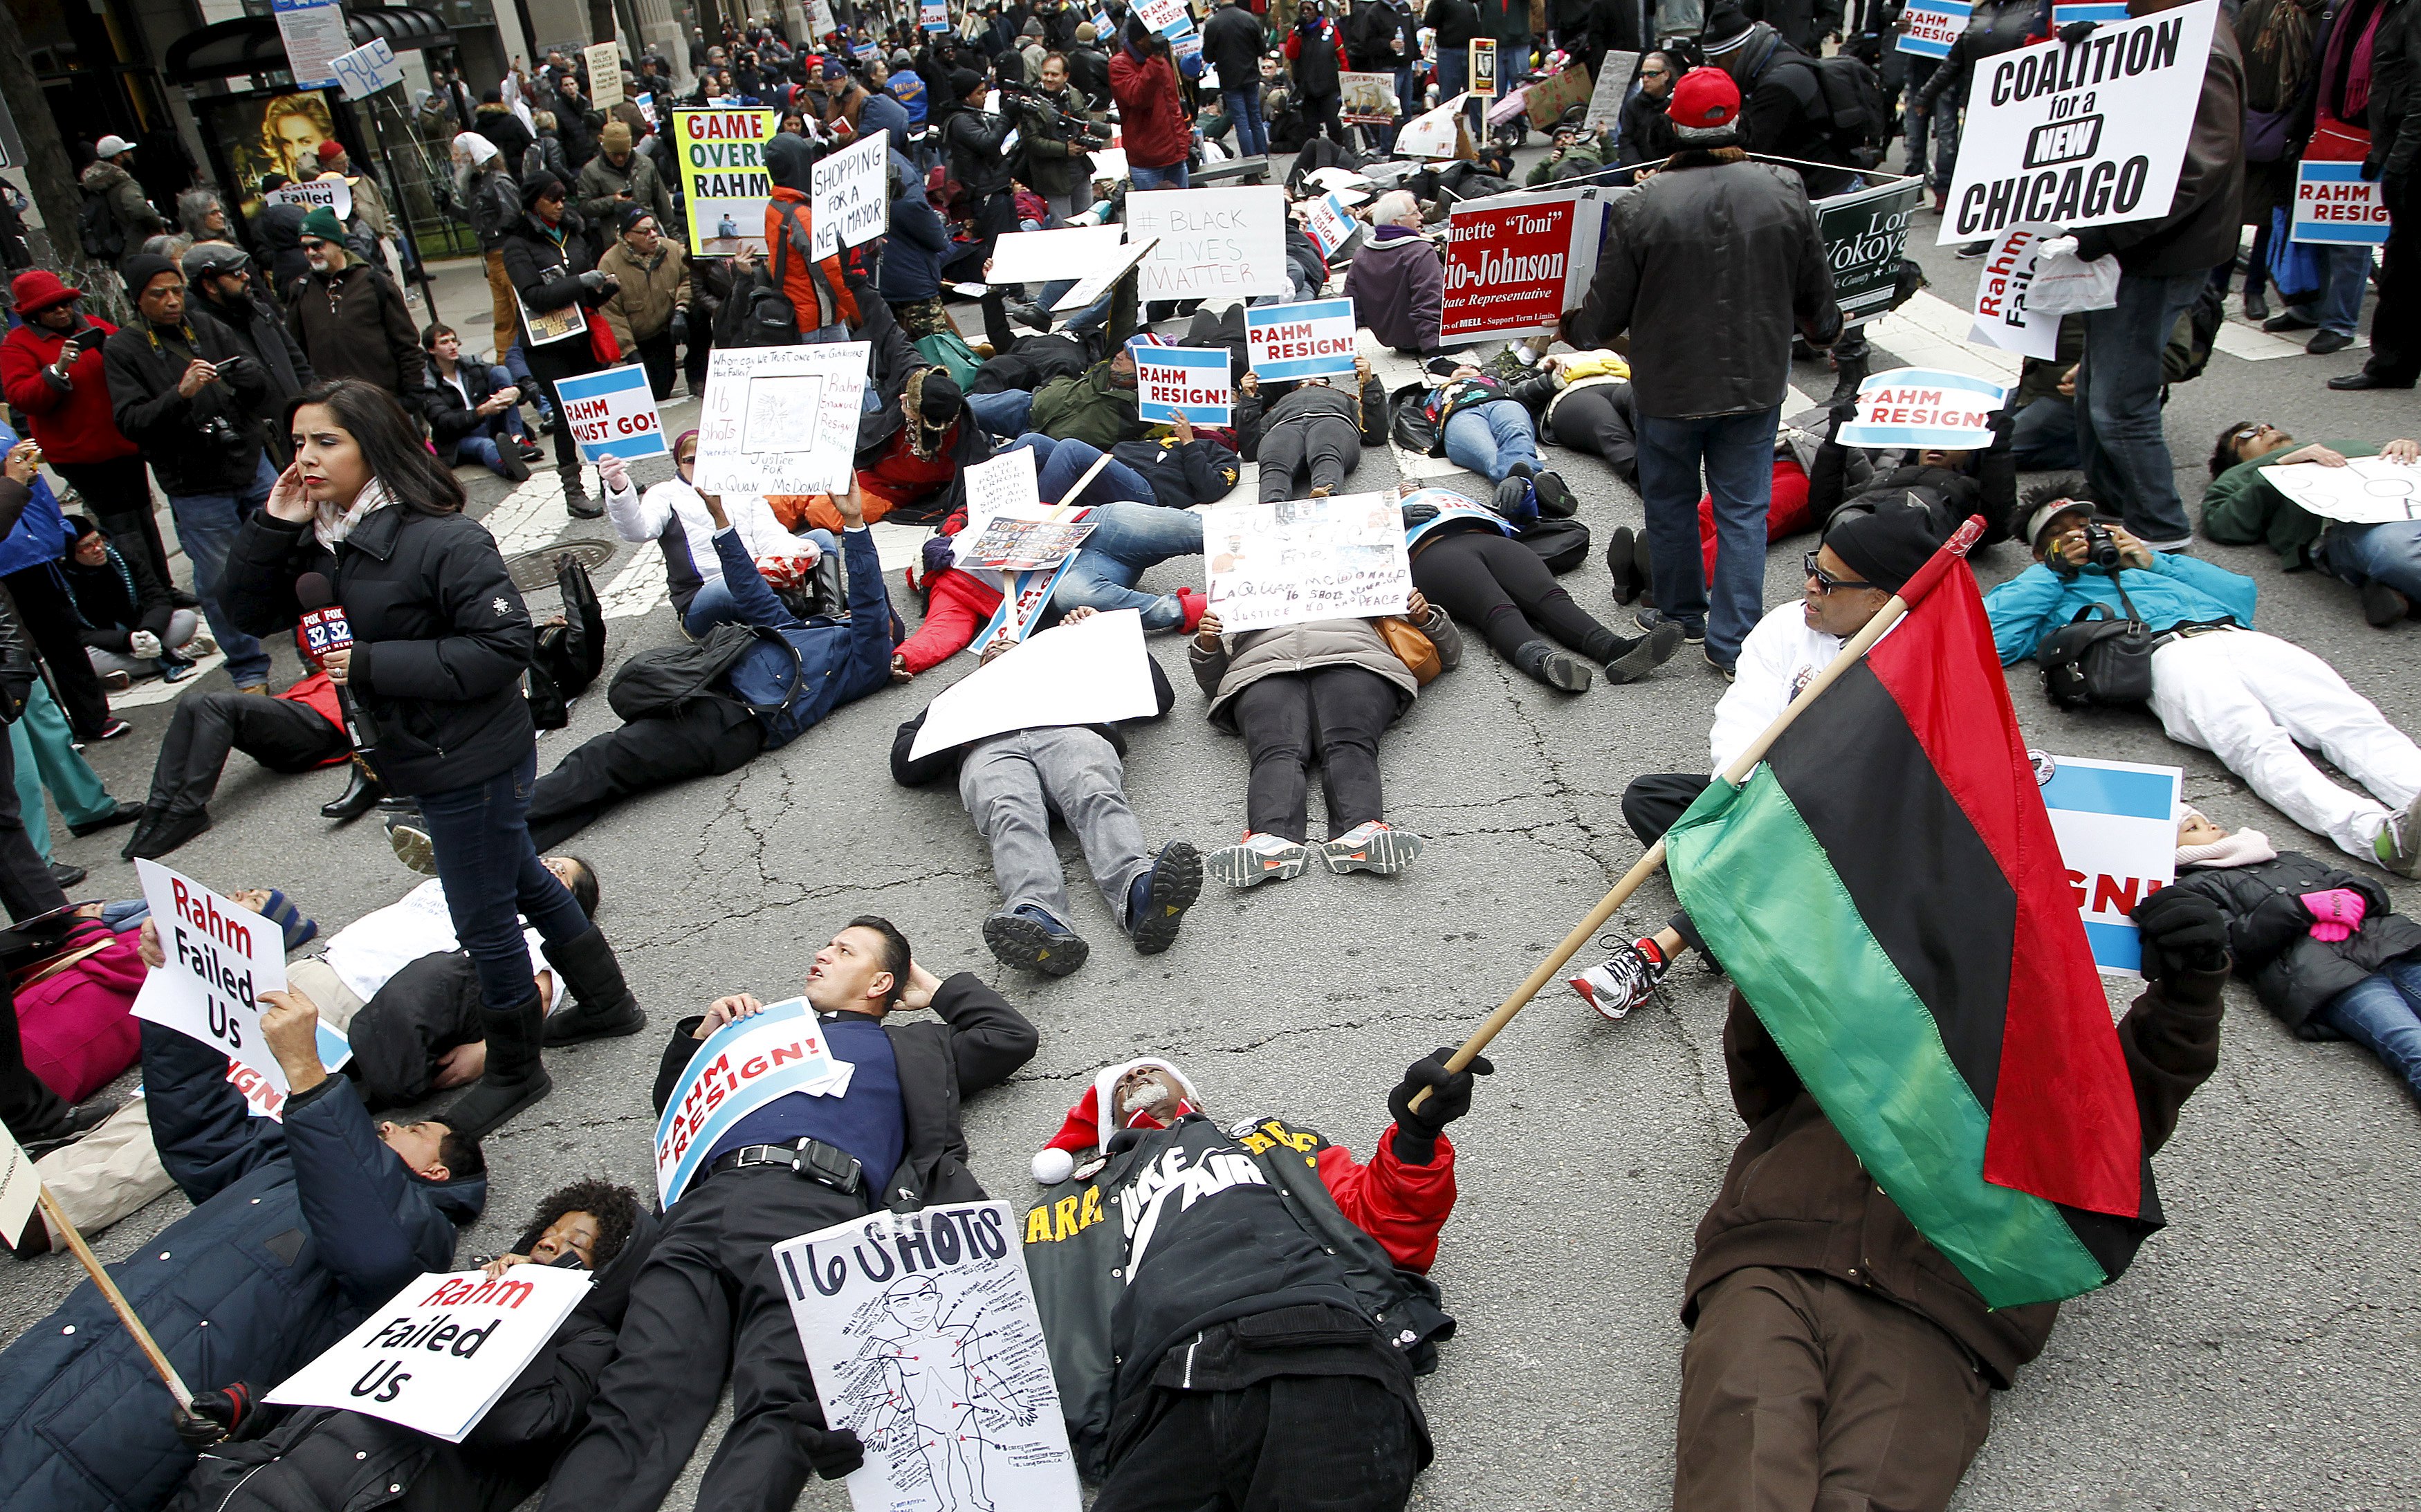 Protesters lie down on Chicago's Michigan Avenue in front of the Disney Store during a protest march against police violence in Chicago, Dec. 24, 2015